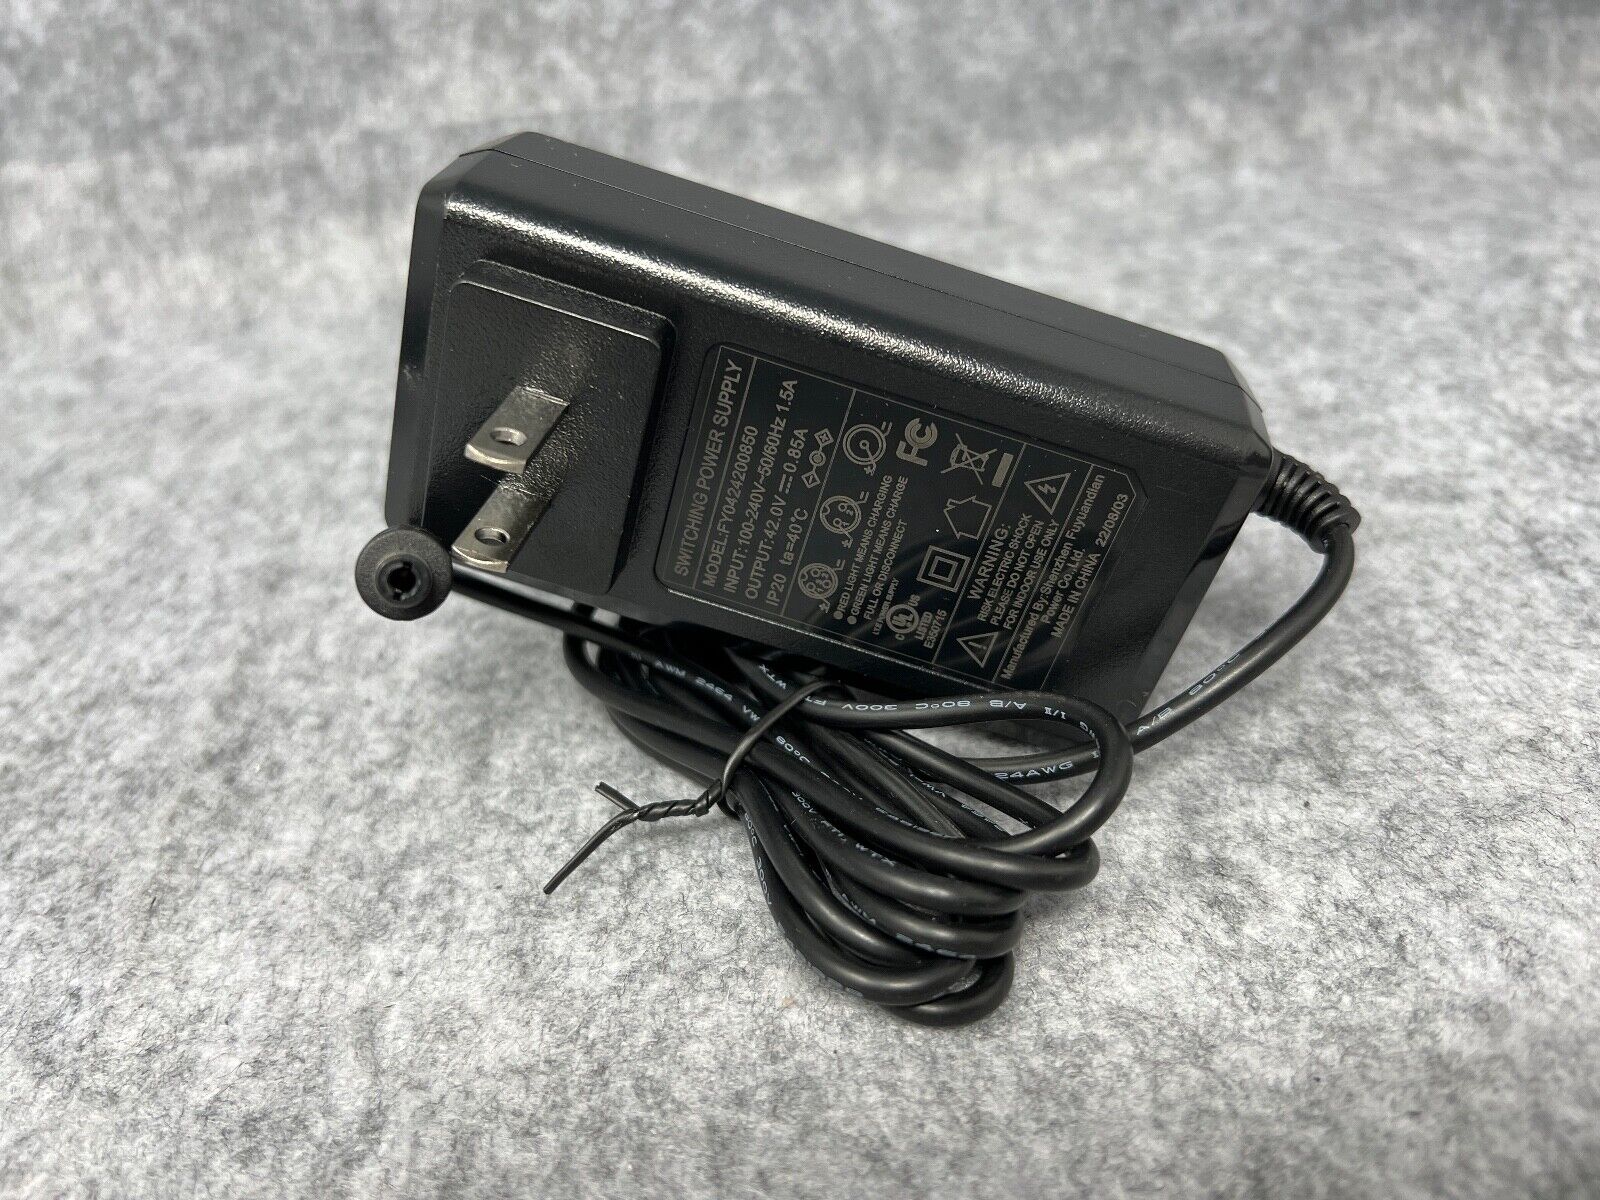 GOTRAX FY0424200850 42V 0.85A HOVERBOARD SCOOTER CHARGER AC POWER ADAPTER [USED]